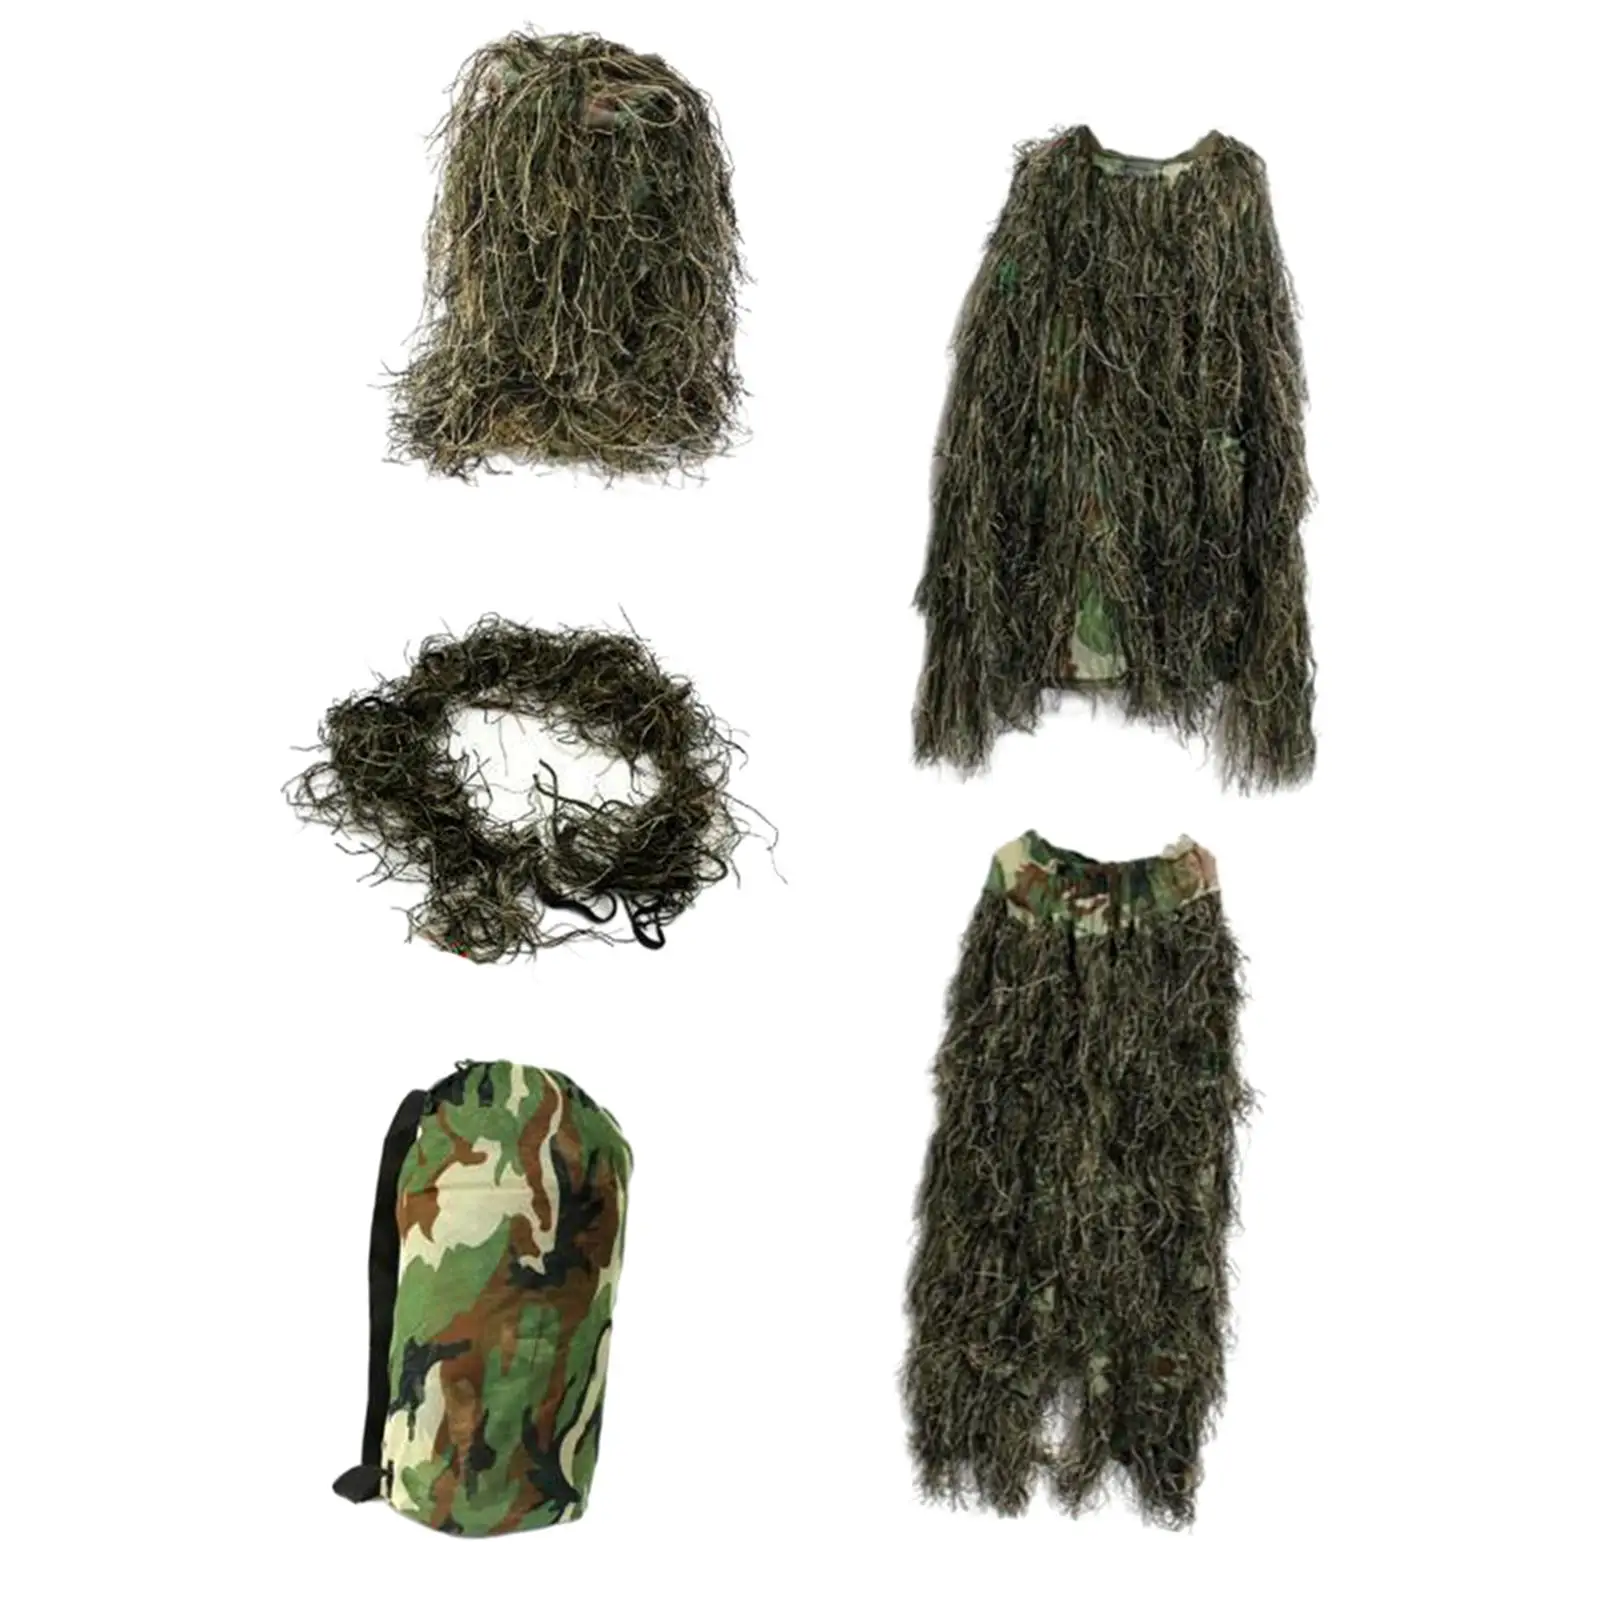 Kids Ghillie Suit Disguise Clothes Clothing for Bird Watching